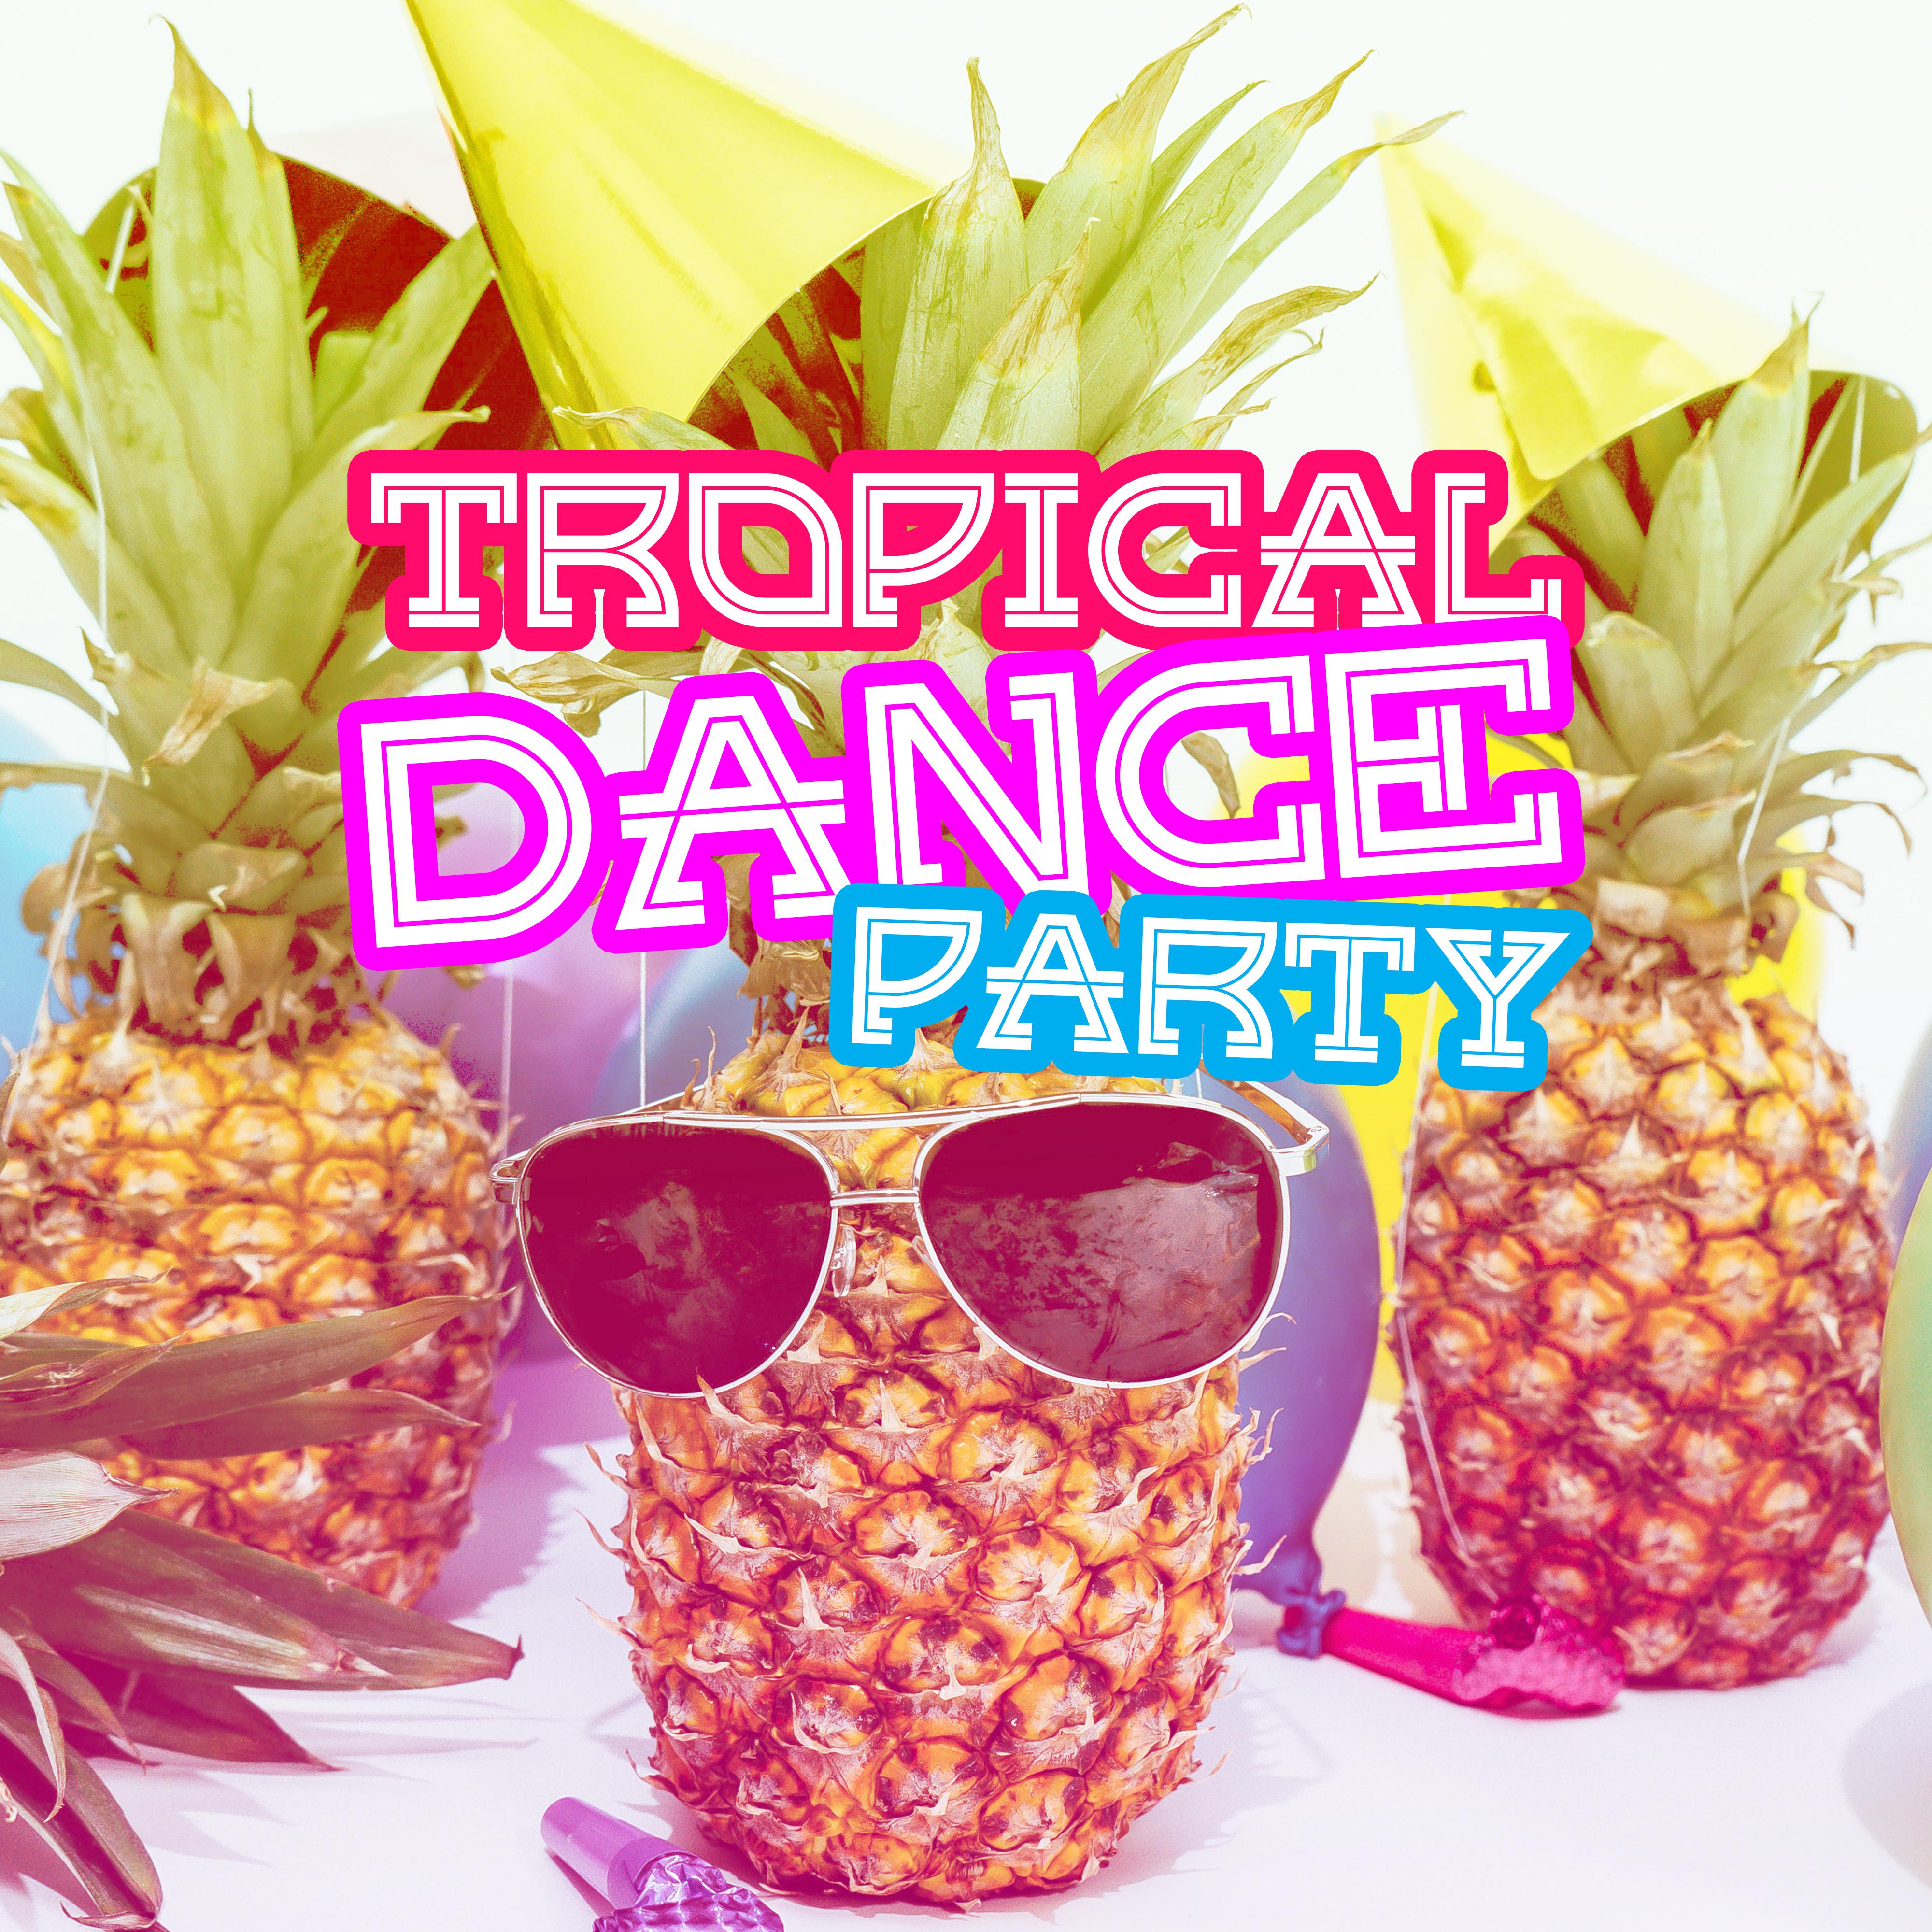 Tropical Dance Party – Chill Out Music 2017, Party Night, Drinks & Cocktails, Beach Dance